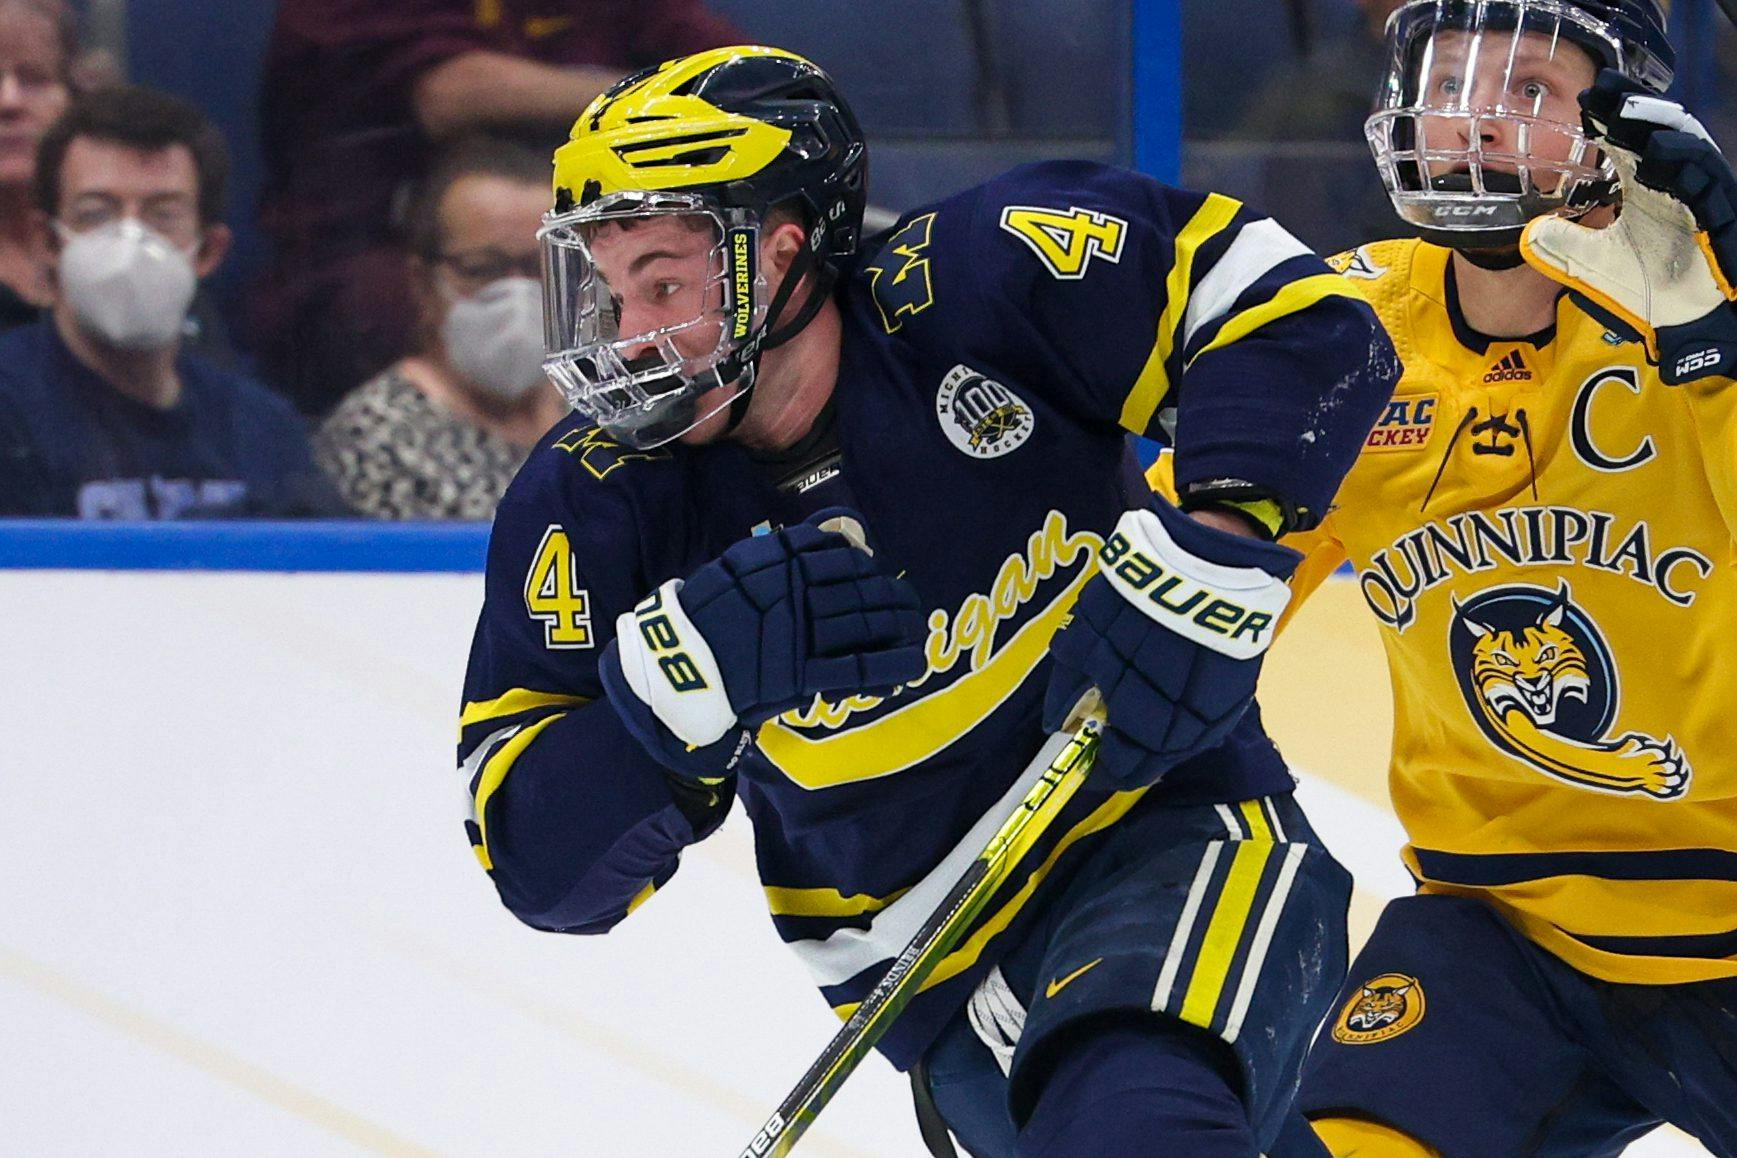 Michigan Hockey on X: With the 4th pick in the first round of the